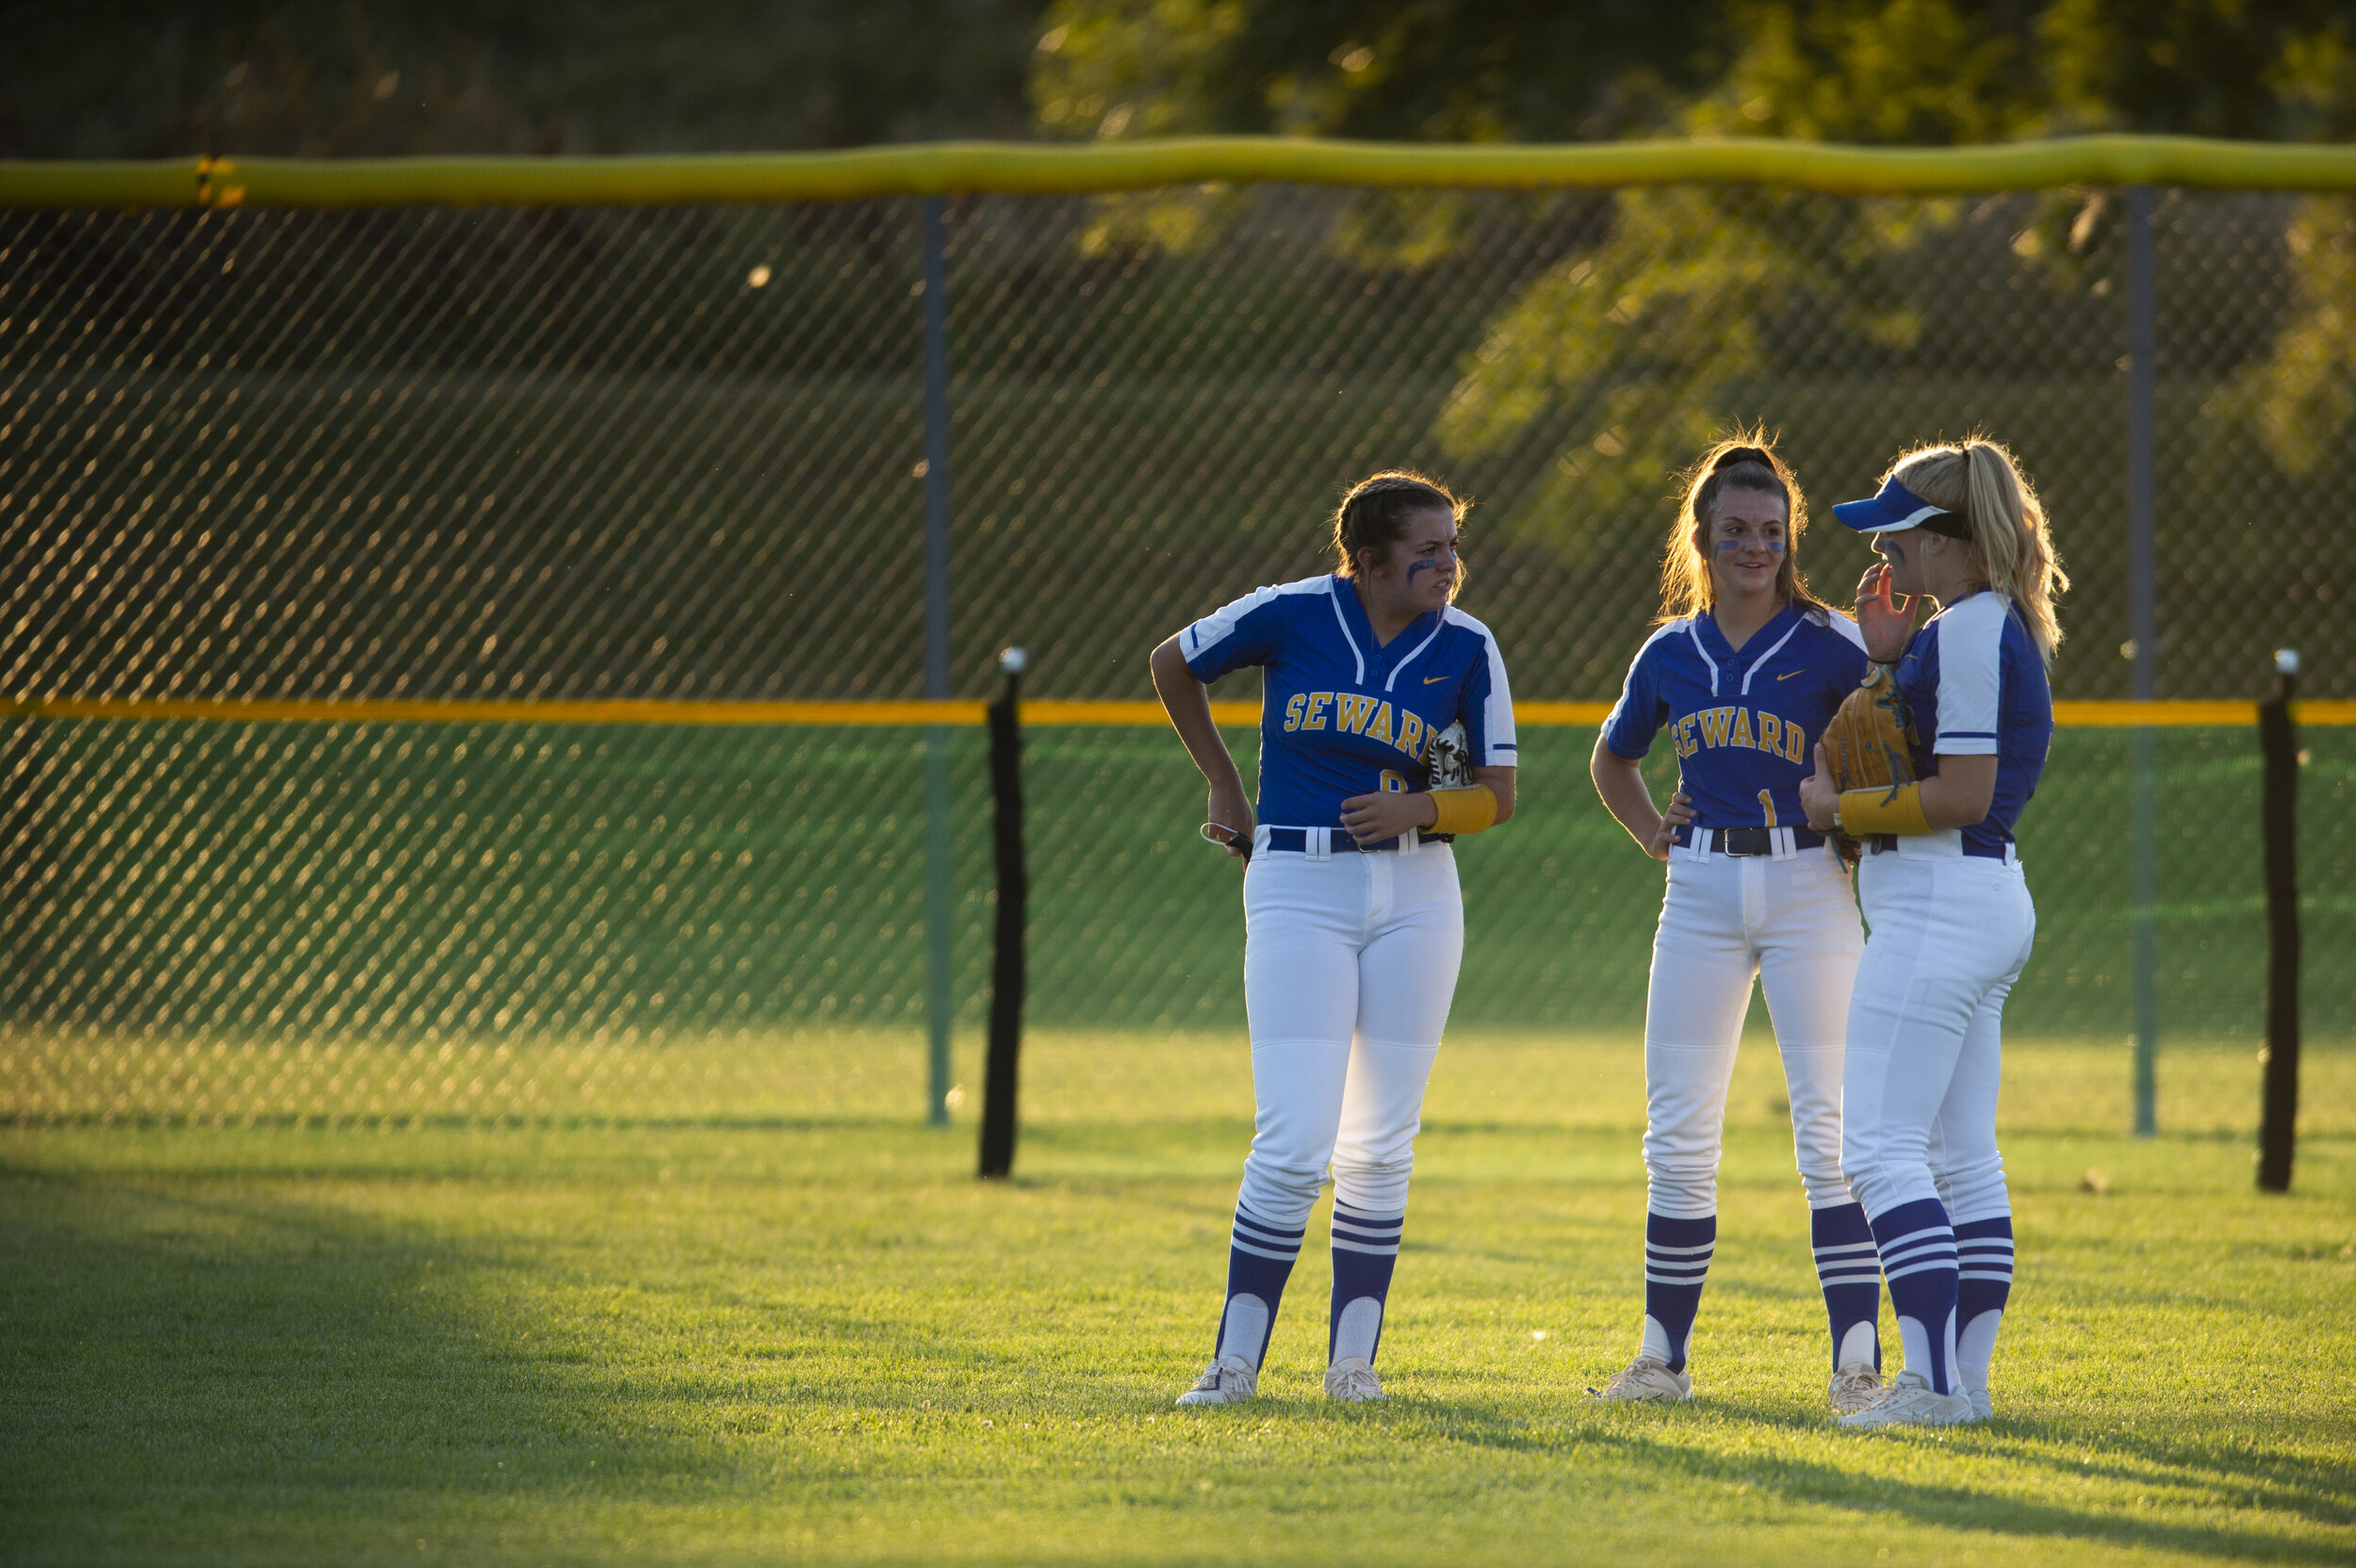  Seward outfielders mingle during a timeout during their match against Norris at Plum Creek Park on Thursday, 9 03, 2020, in Seward, Nebraska. 